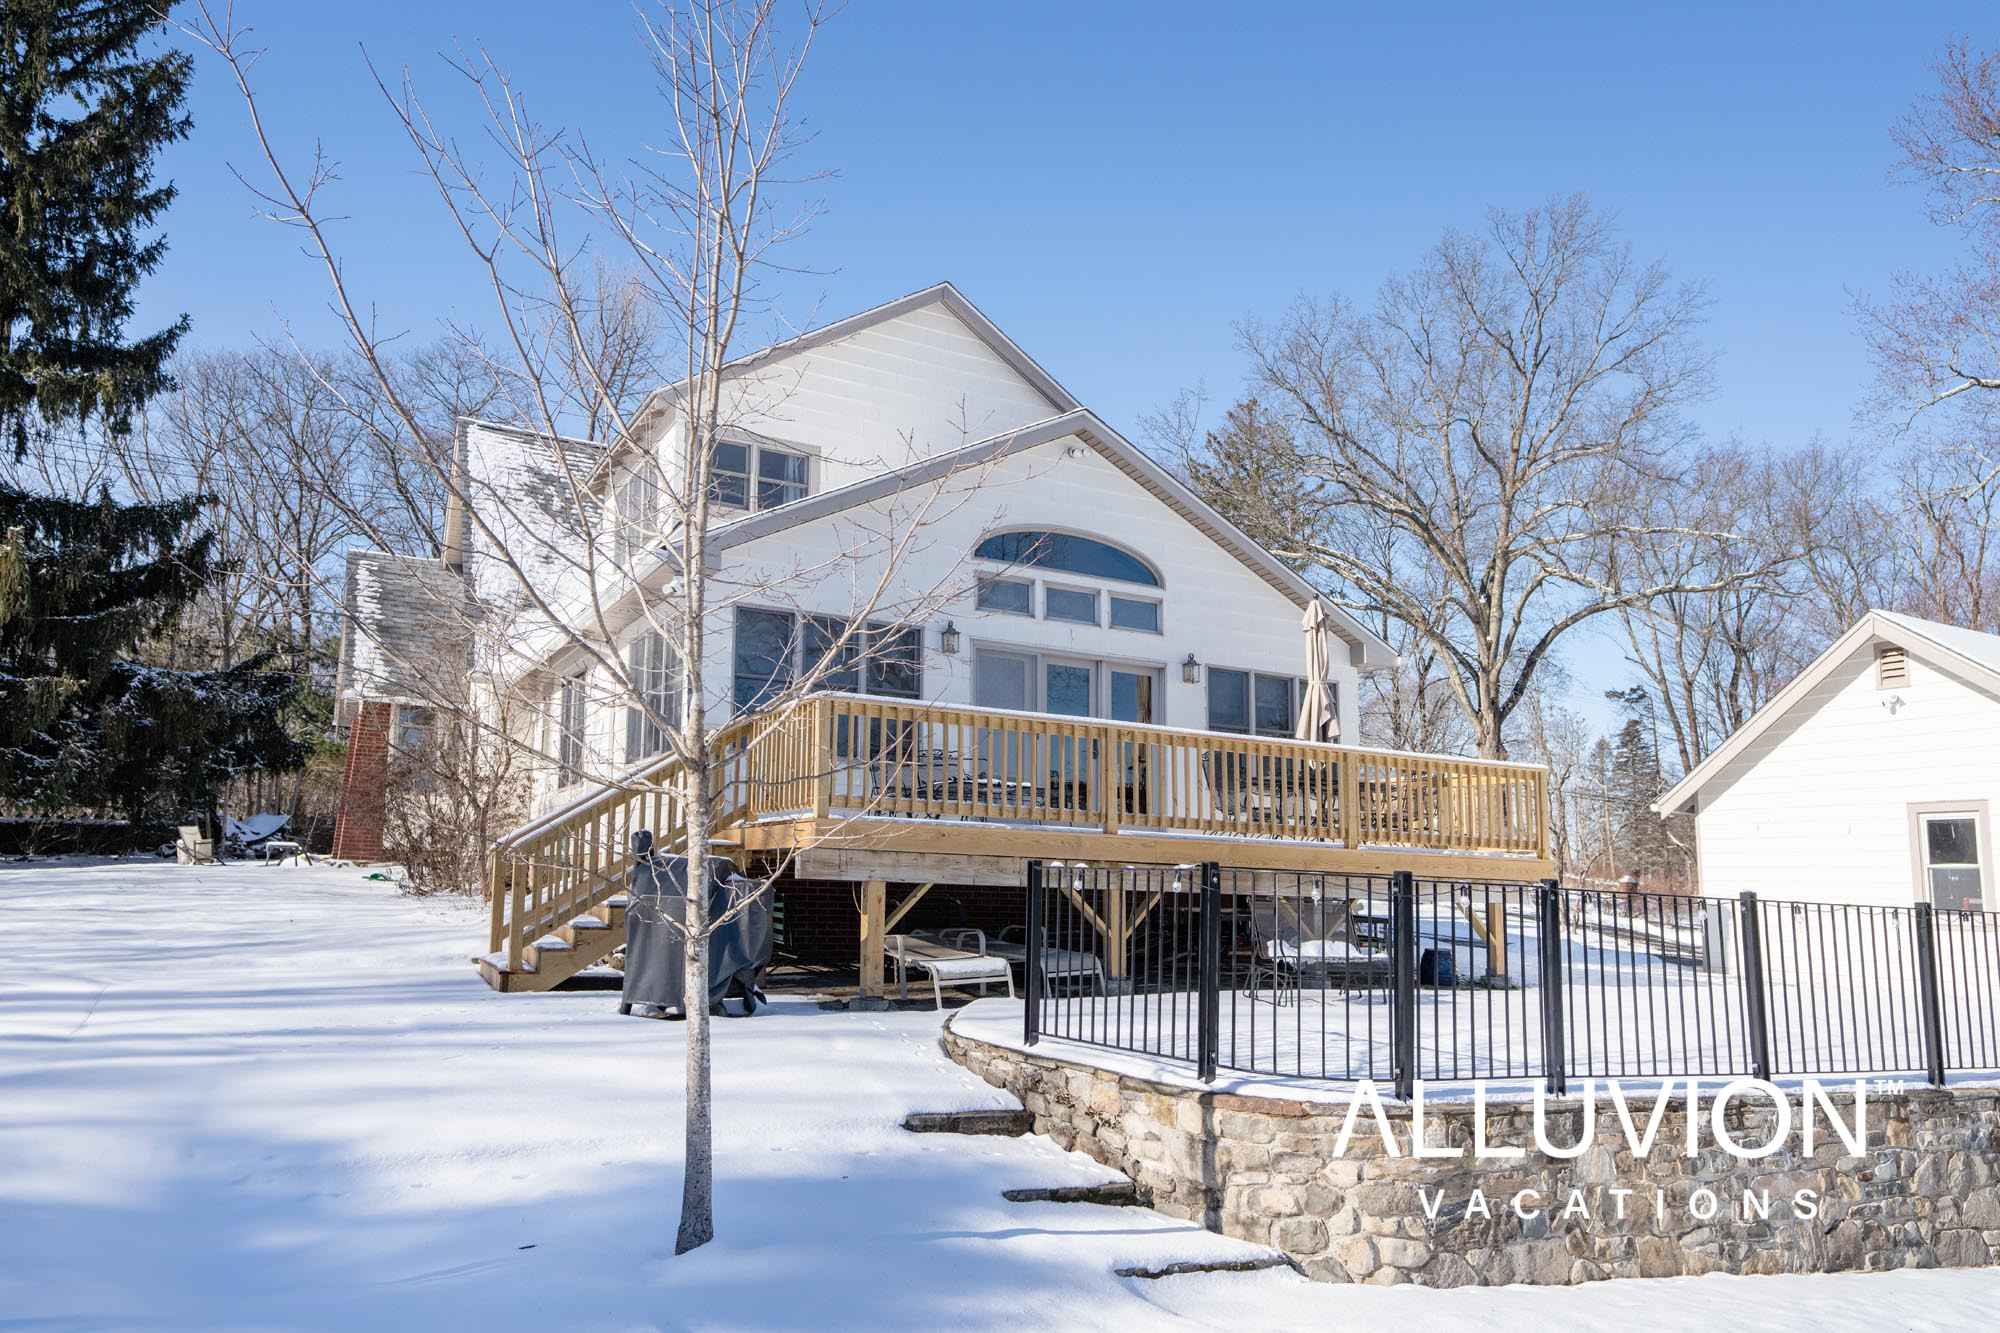 Trendy Winter Retreat: Conquer Mount Peter and Cozy Up in Monroe's Best Airbnb by Alluvion Vacations